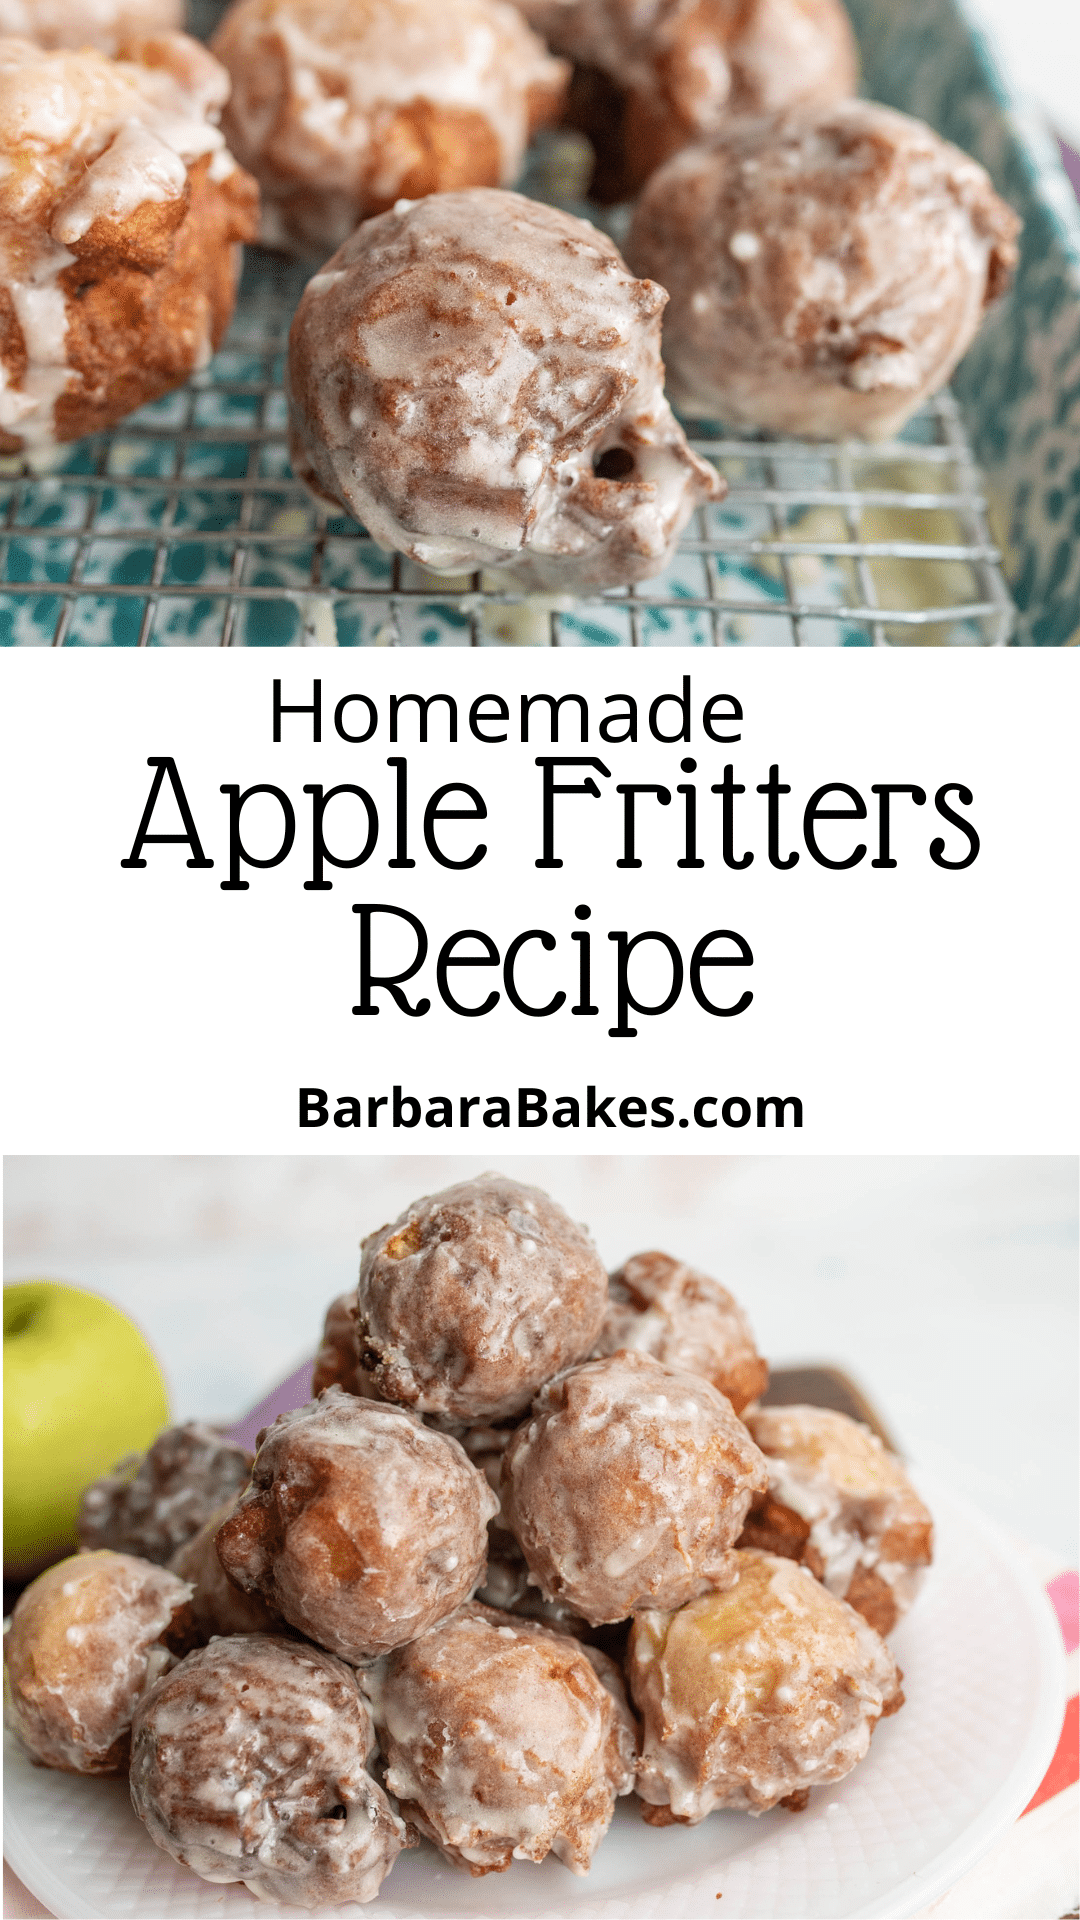 Apple fritters are created with a no-yeast homemade batter and fresh apples, fried to golden perfection and glazed simply. via @barbarabakes